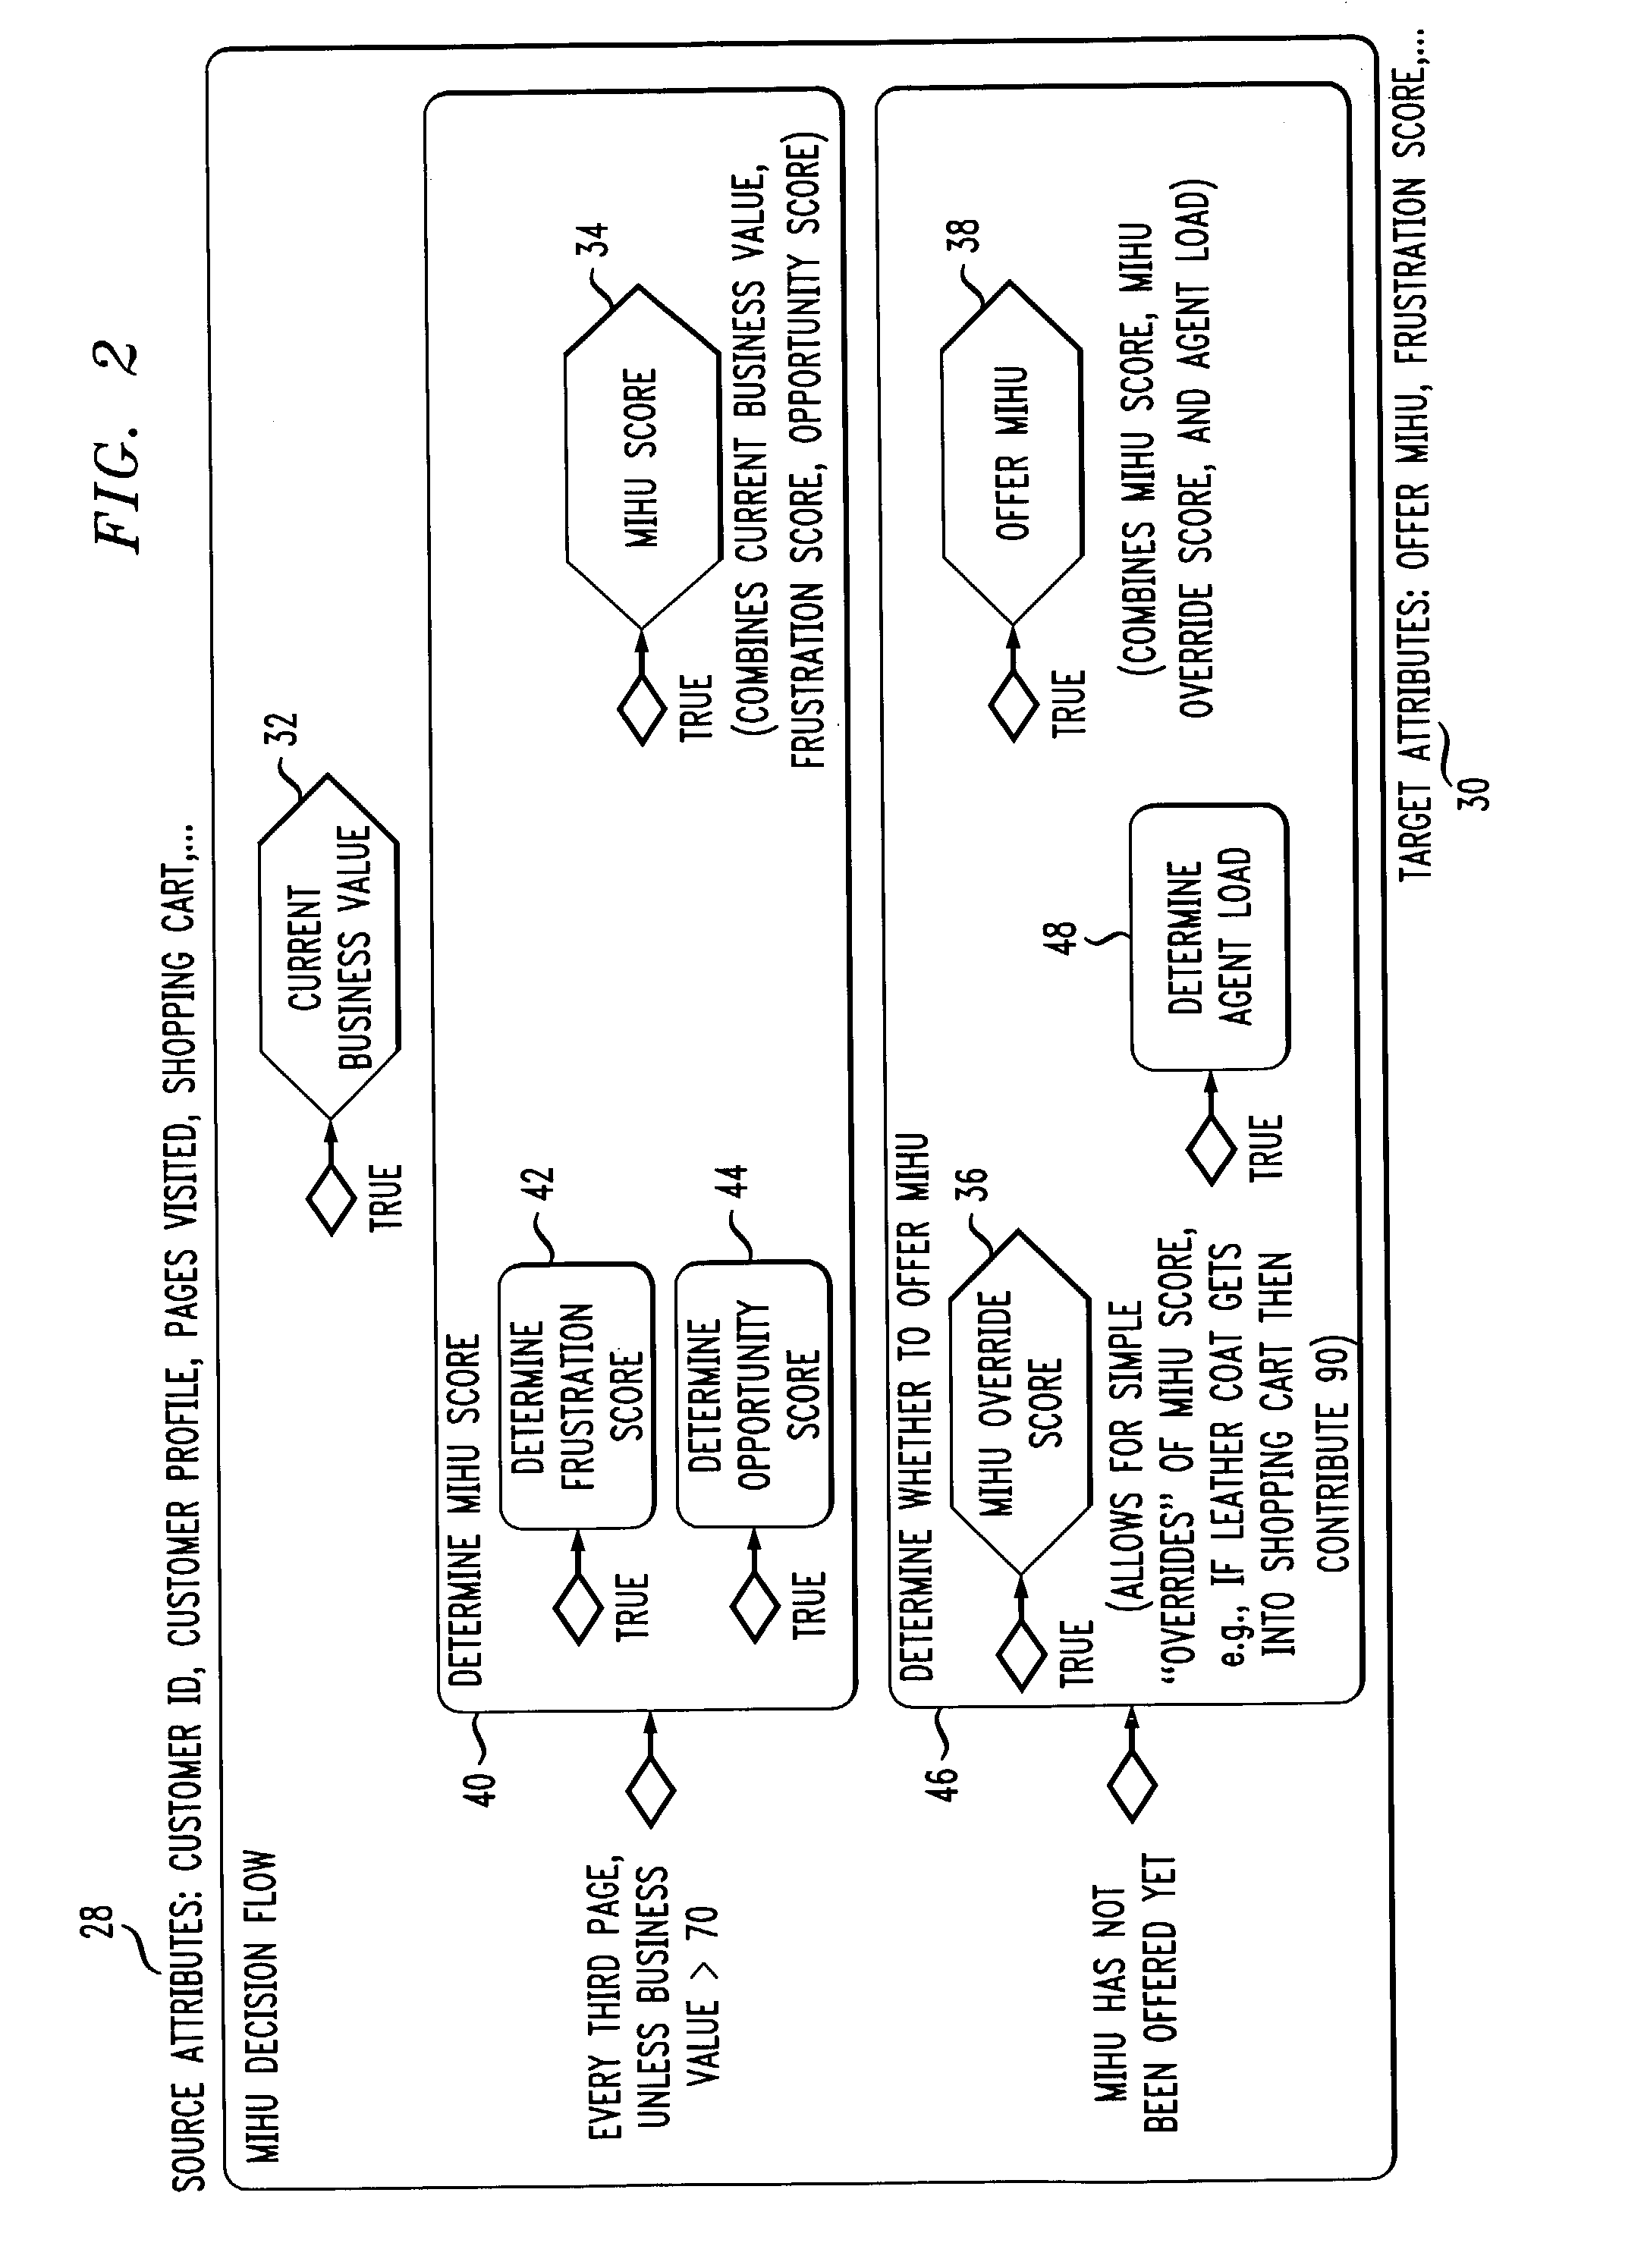 Methods and apparatus for automated monitoring and action taking based on decision support mechanism